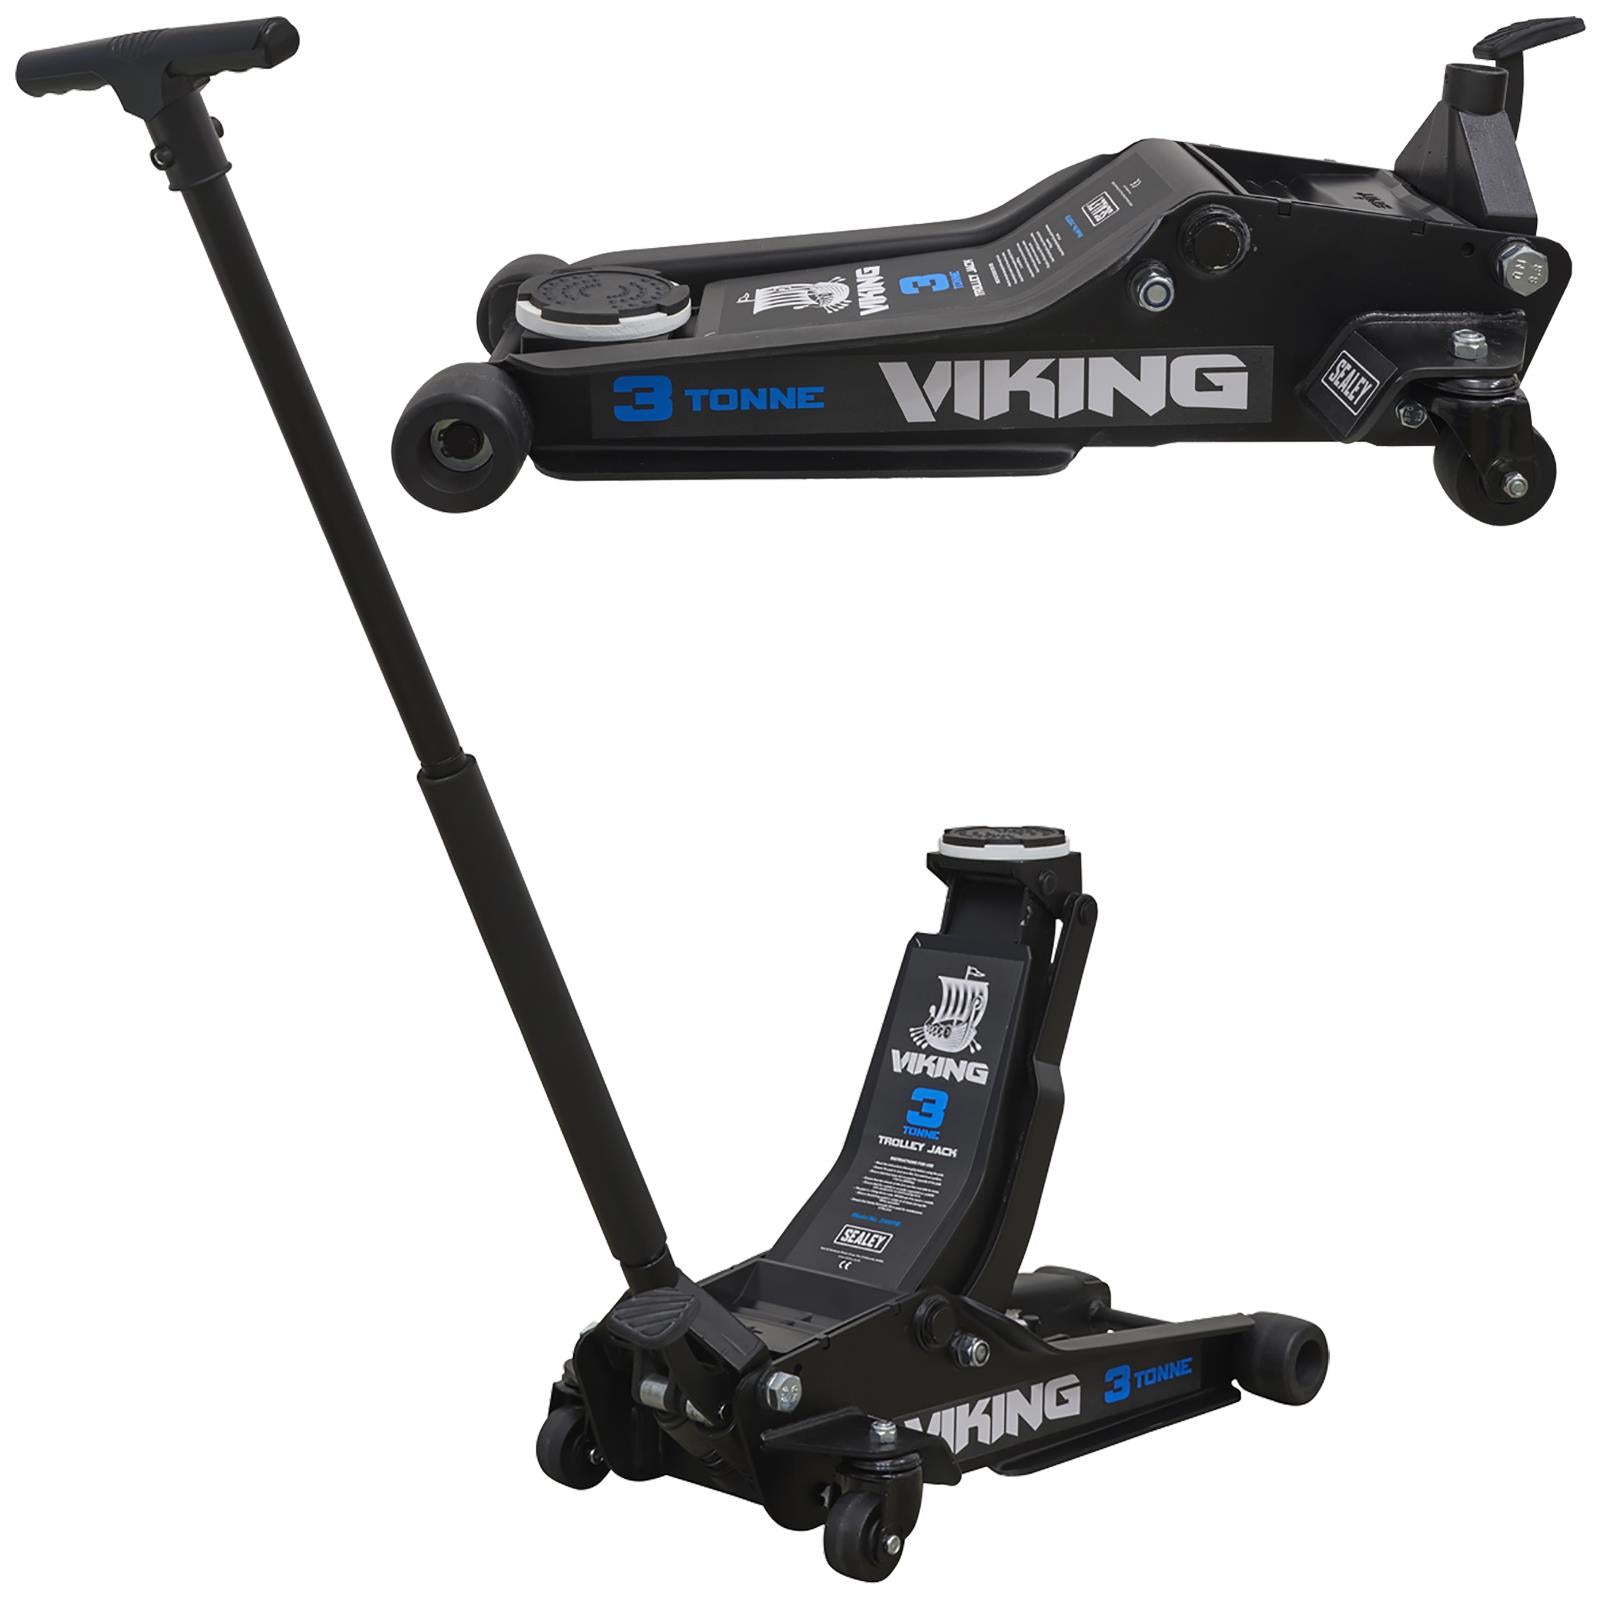 Sealey Viking 3 Tonne Low Entry Trolley Jack with Rocket Lift